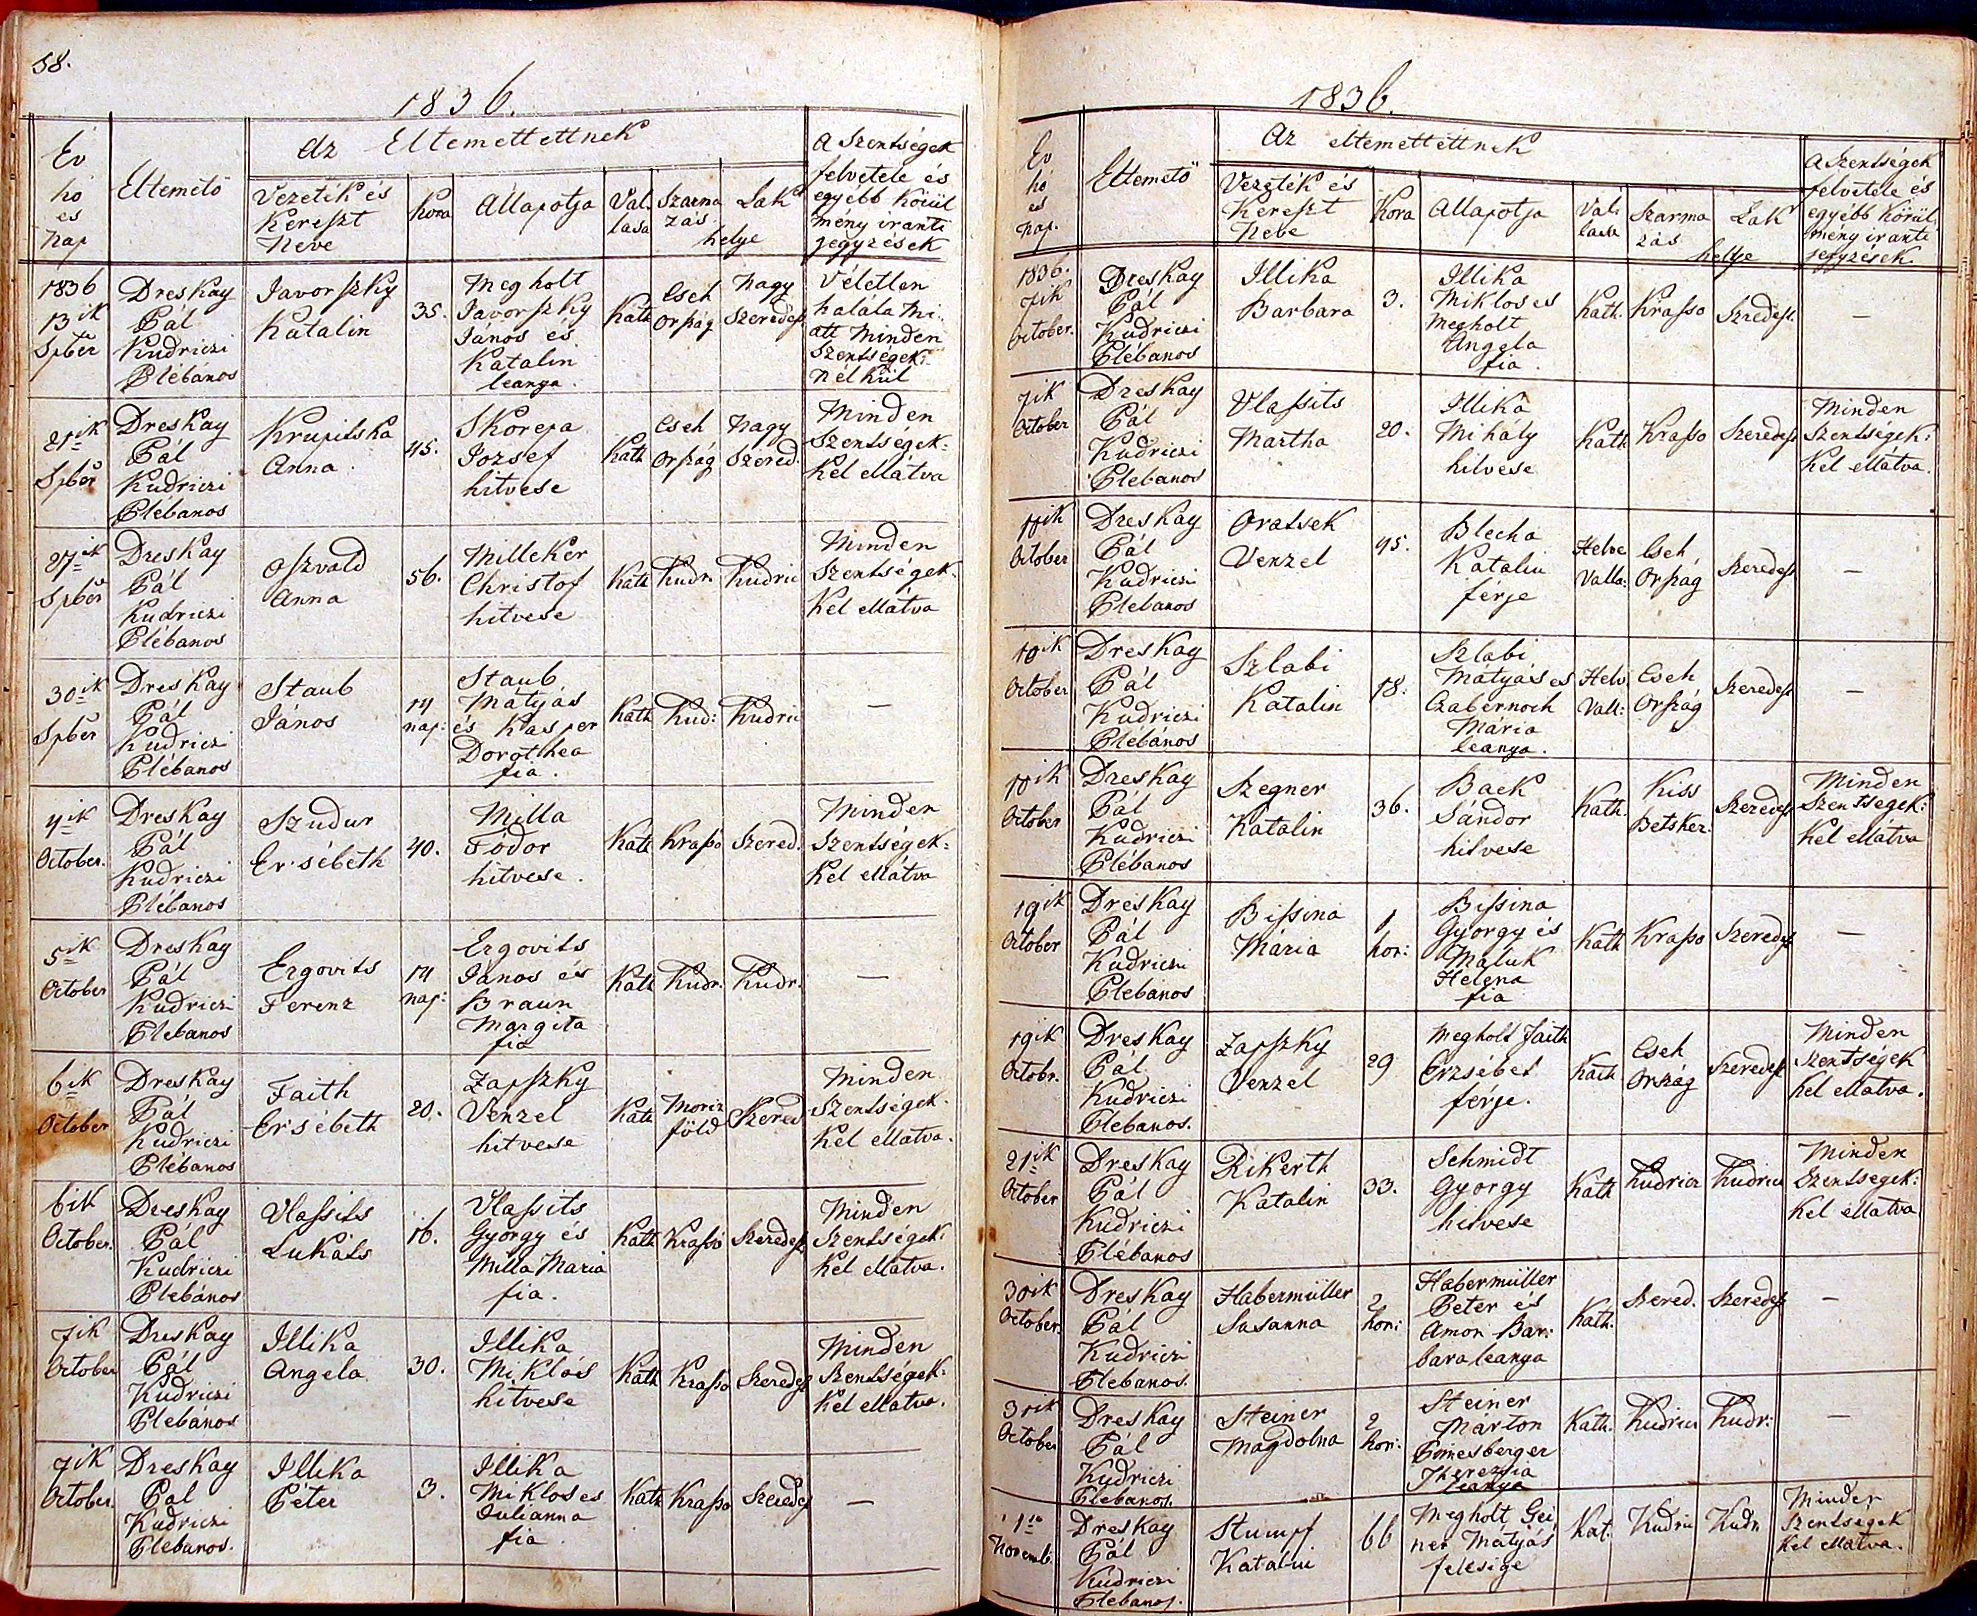 images/church_records/DEATHS/1742-1775D/058 i 059